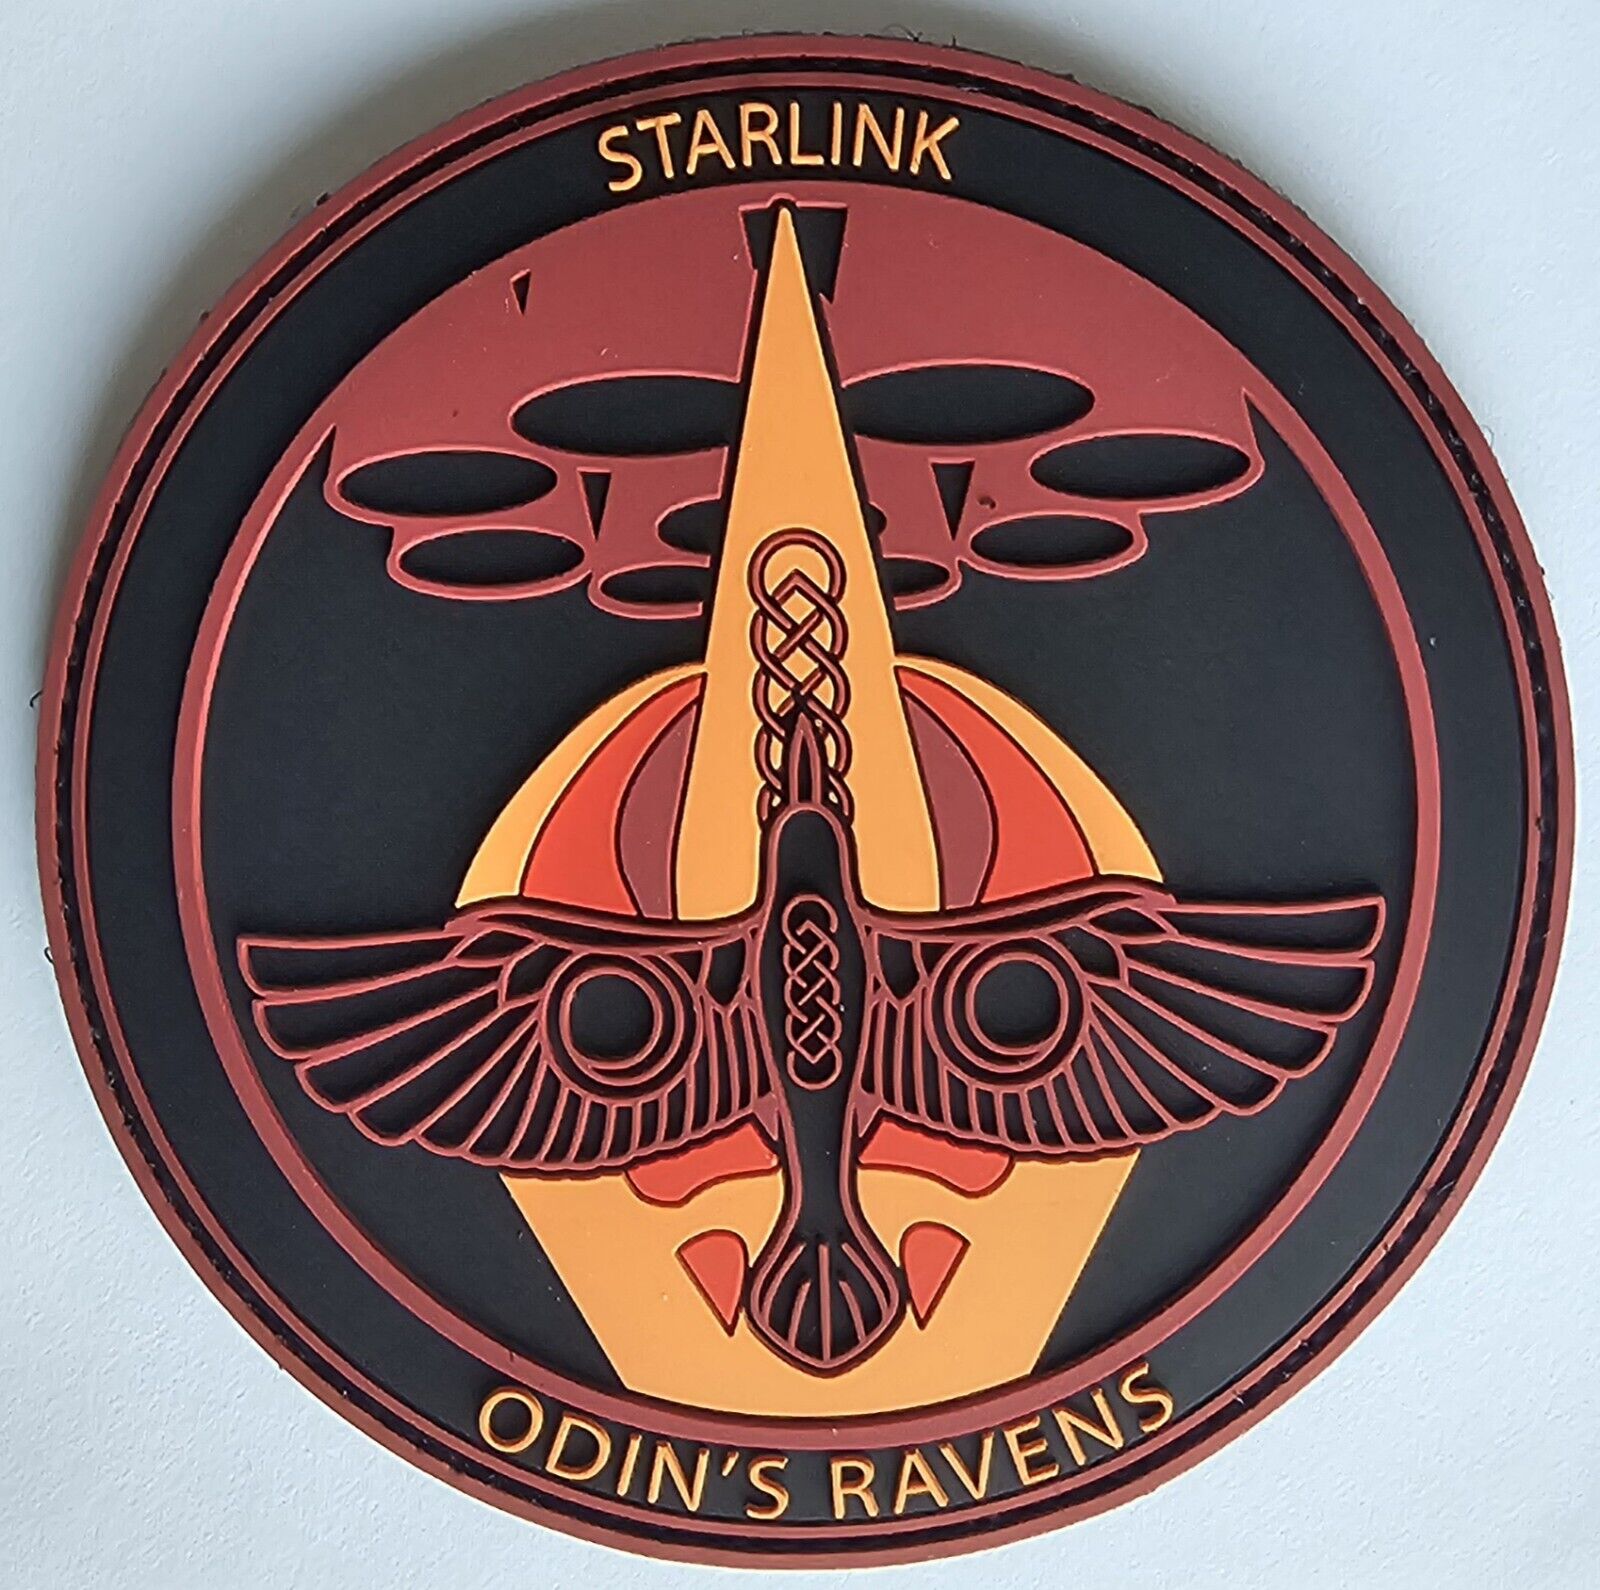 Official SLD-30/2SLS SpaceX Starlink Space Launch Mission Patch